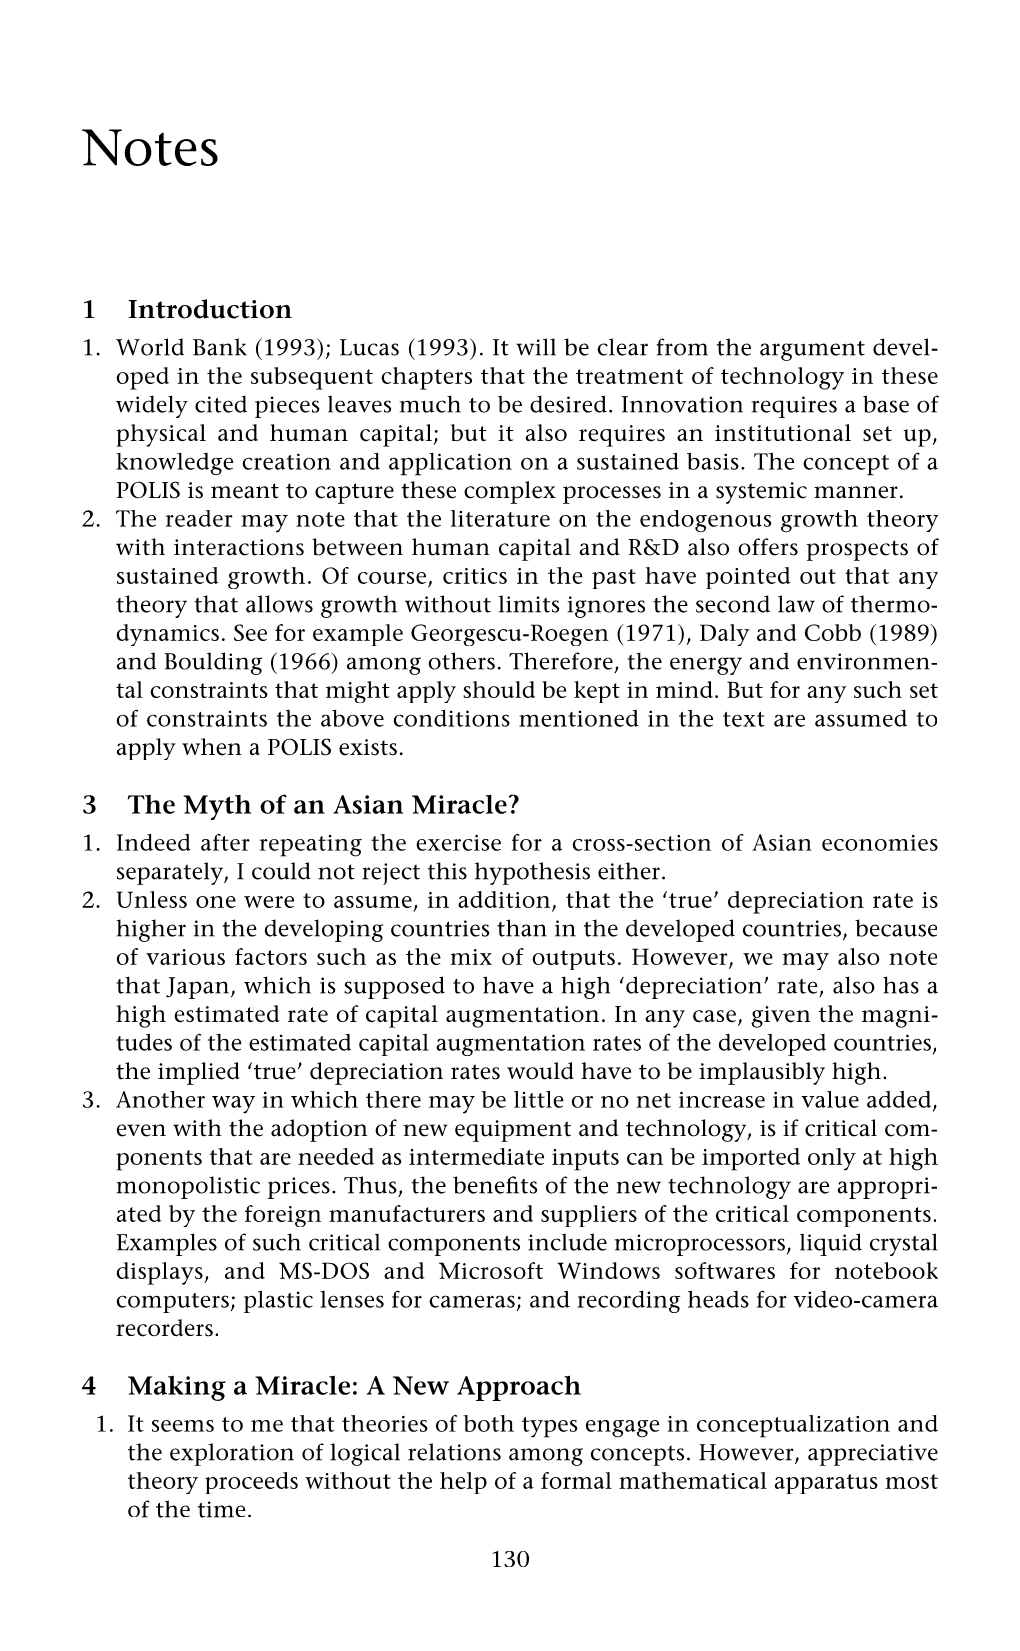 1 Introduction 3 the Myth of an Asian Miracle? 4 Making a Miracle: a New